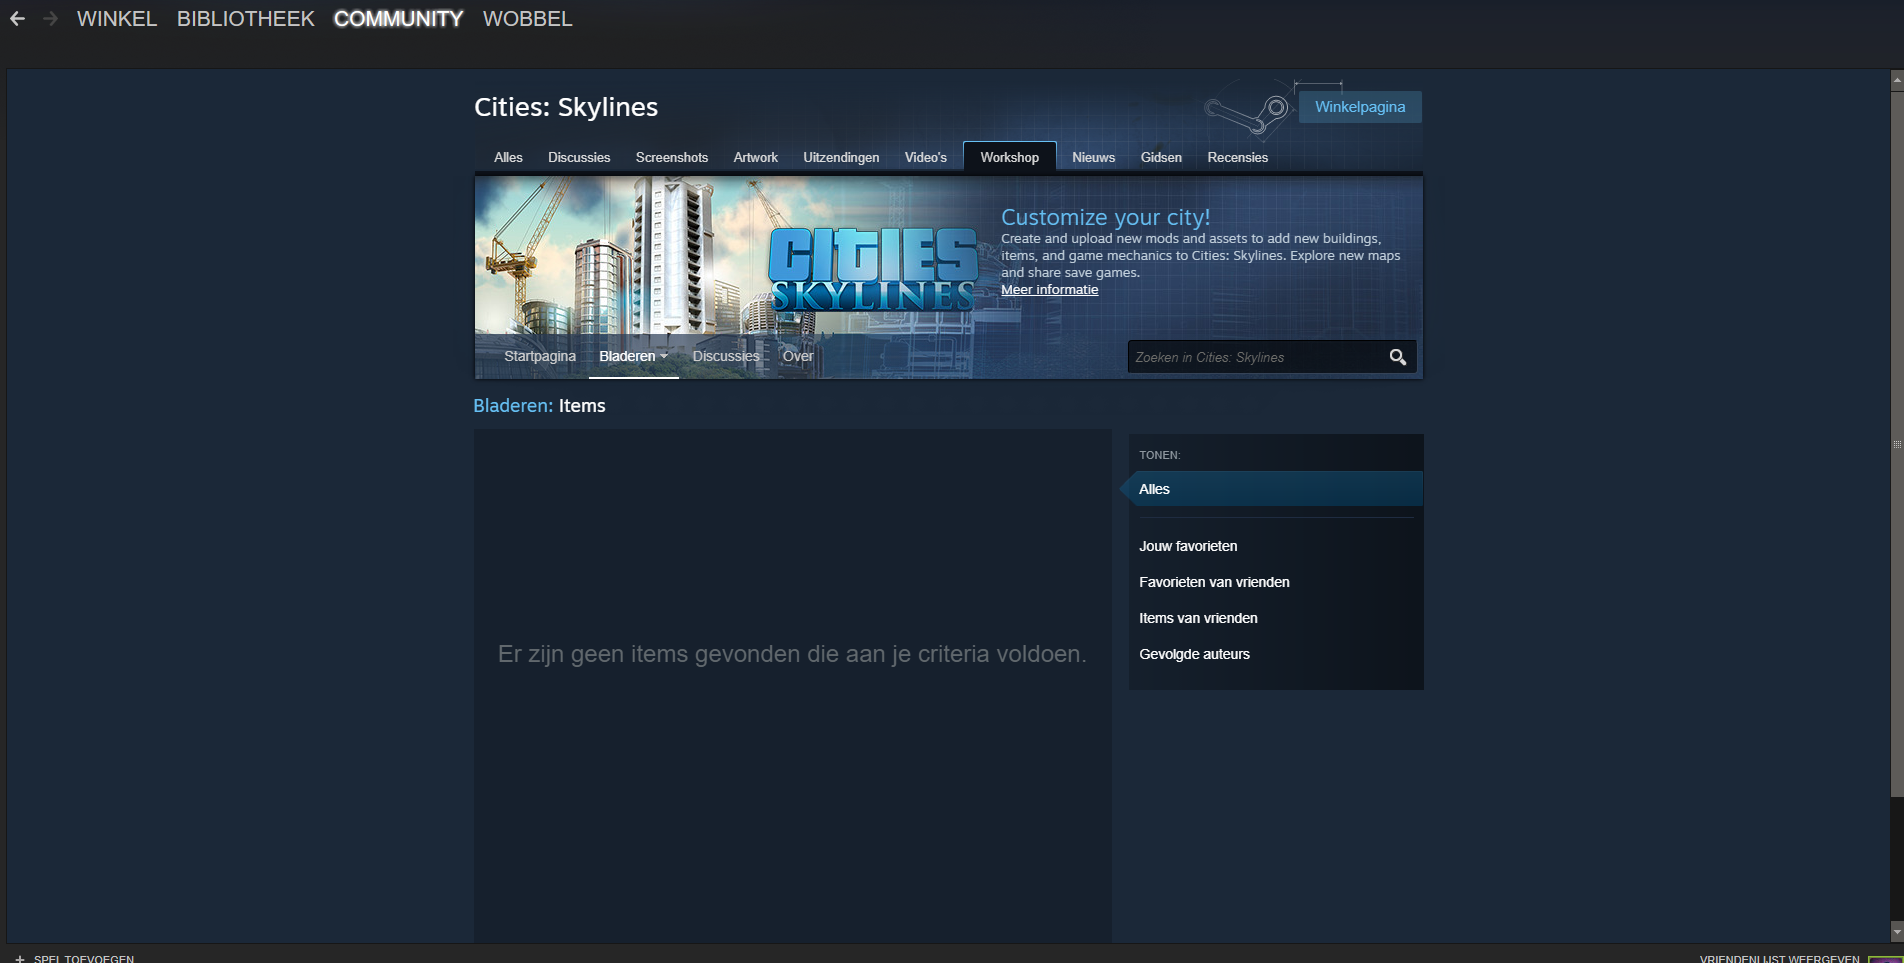 download from steam workshop without steam reddit